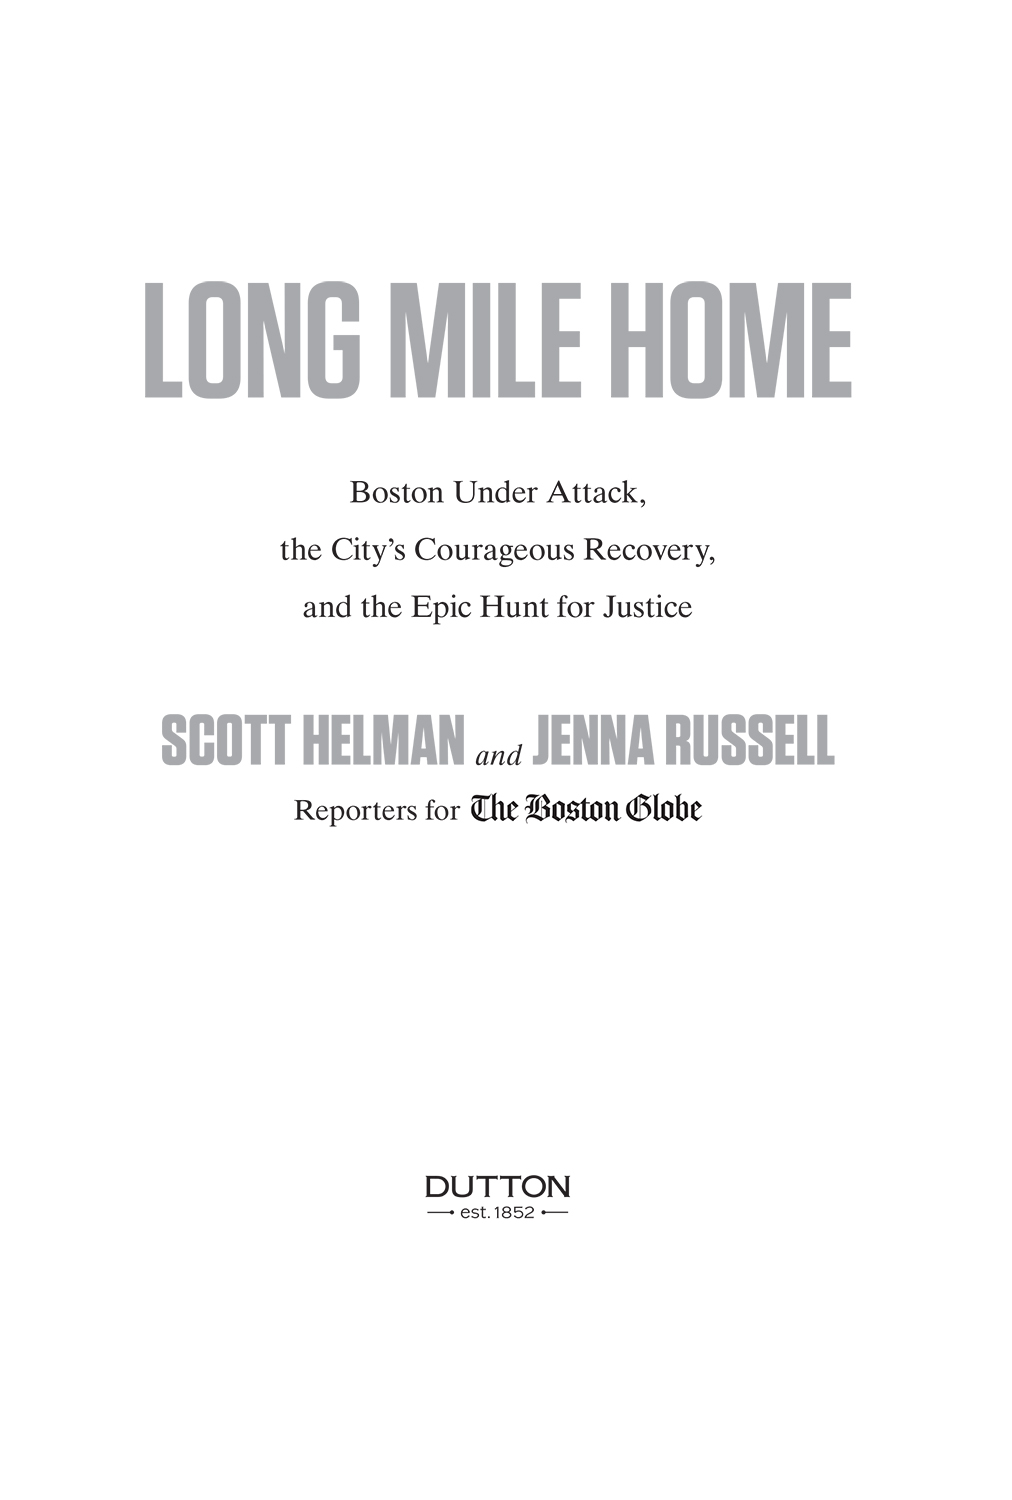 Long Mile Home Boston Under Attack the Citys Courageous Recovery and the Epic Hunt for Justice - image 2